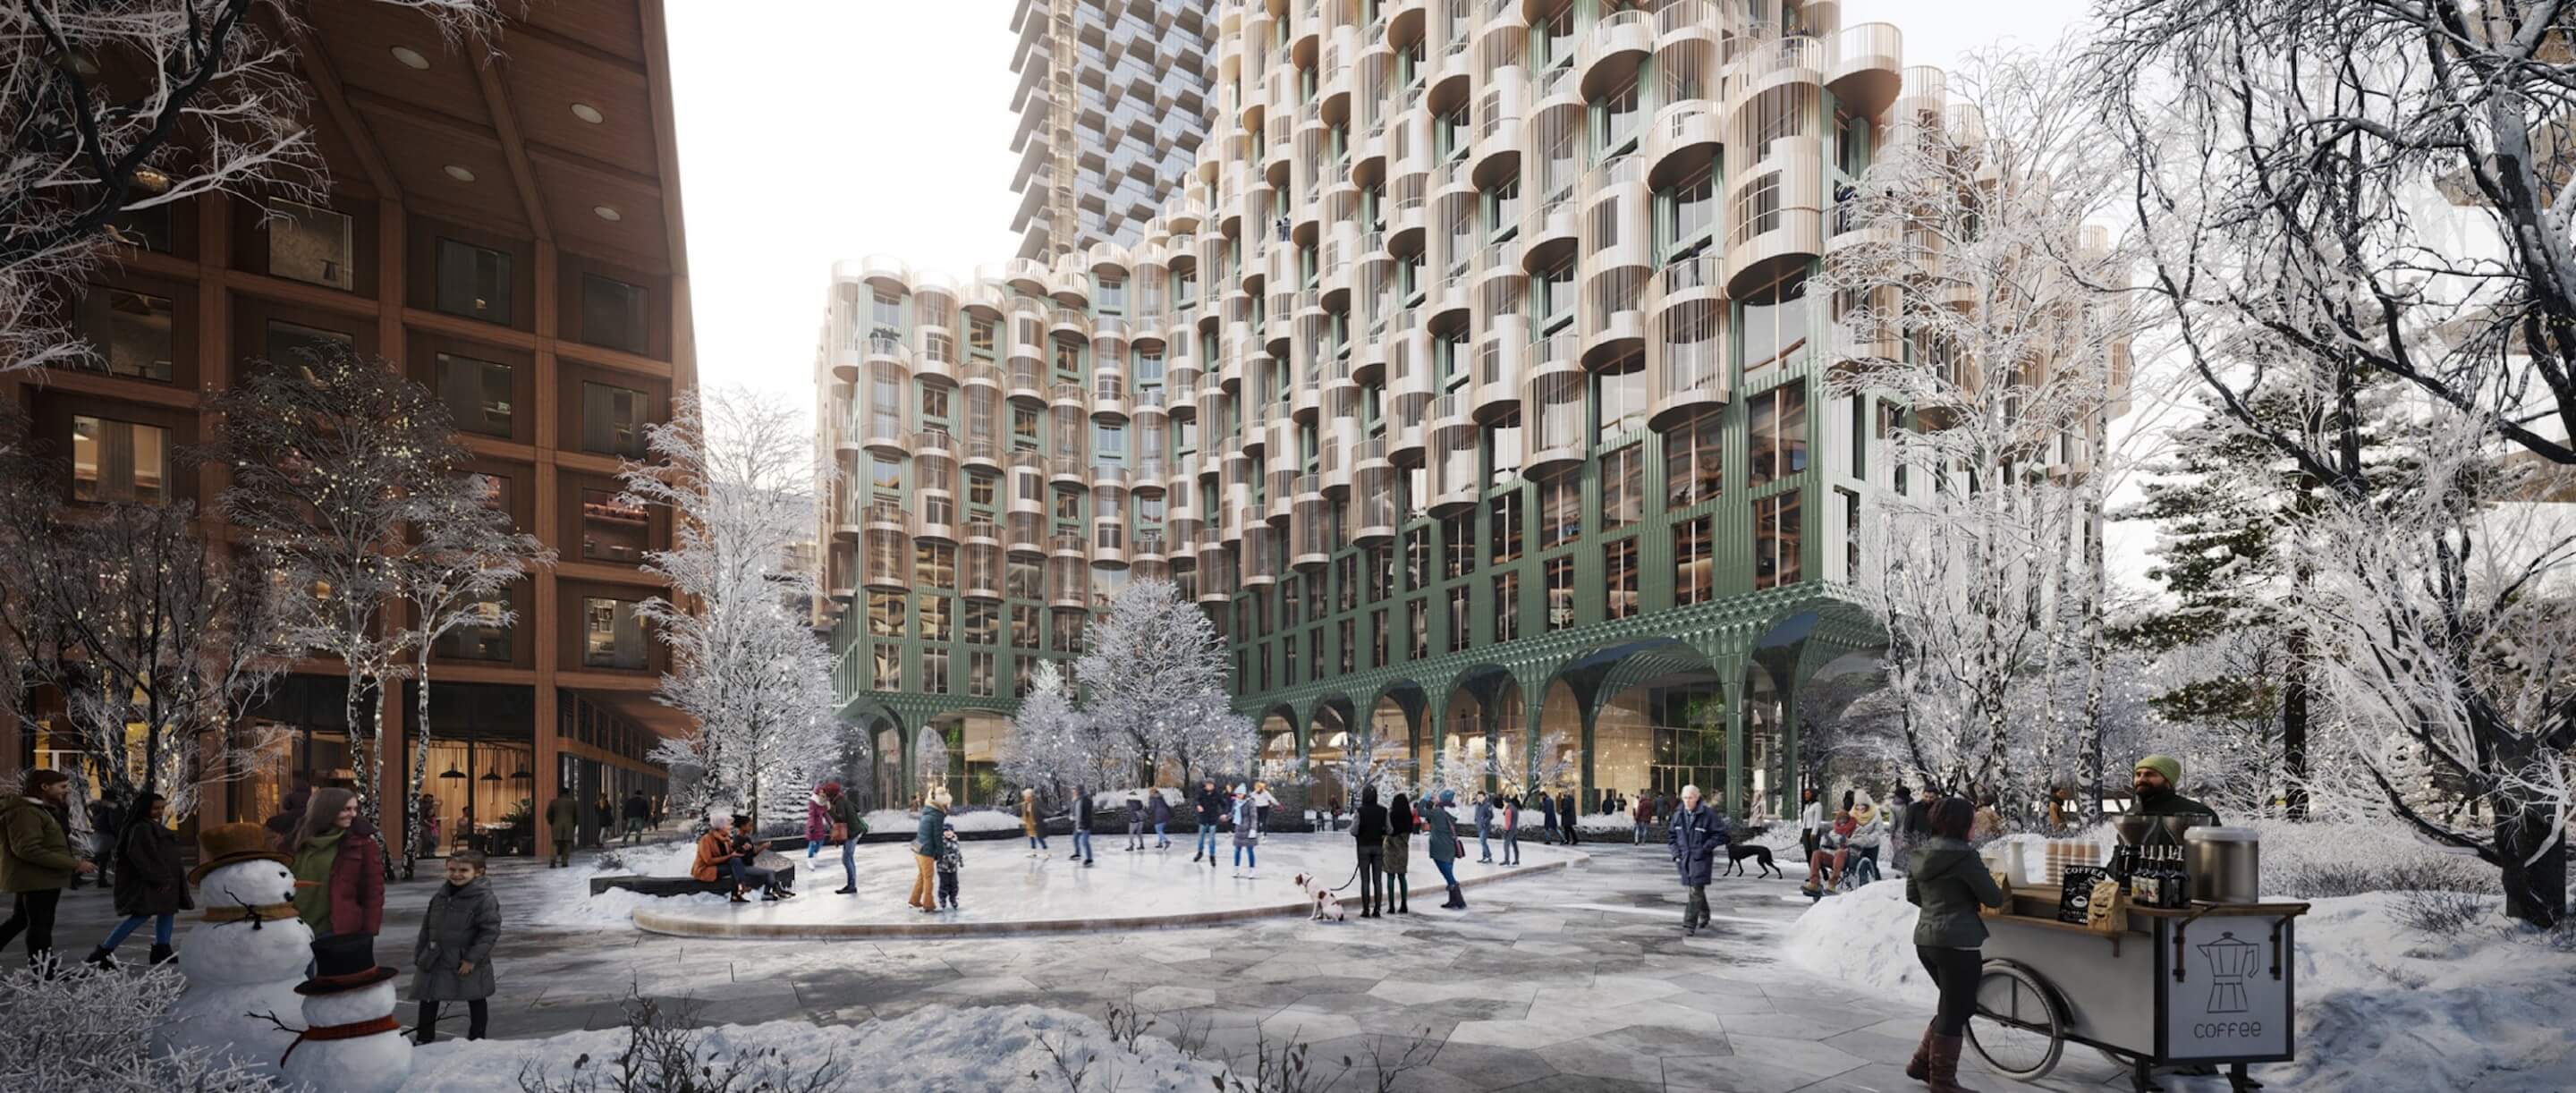 rendering of an urban mixed-use district during winter with ice skating and snowmen